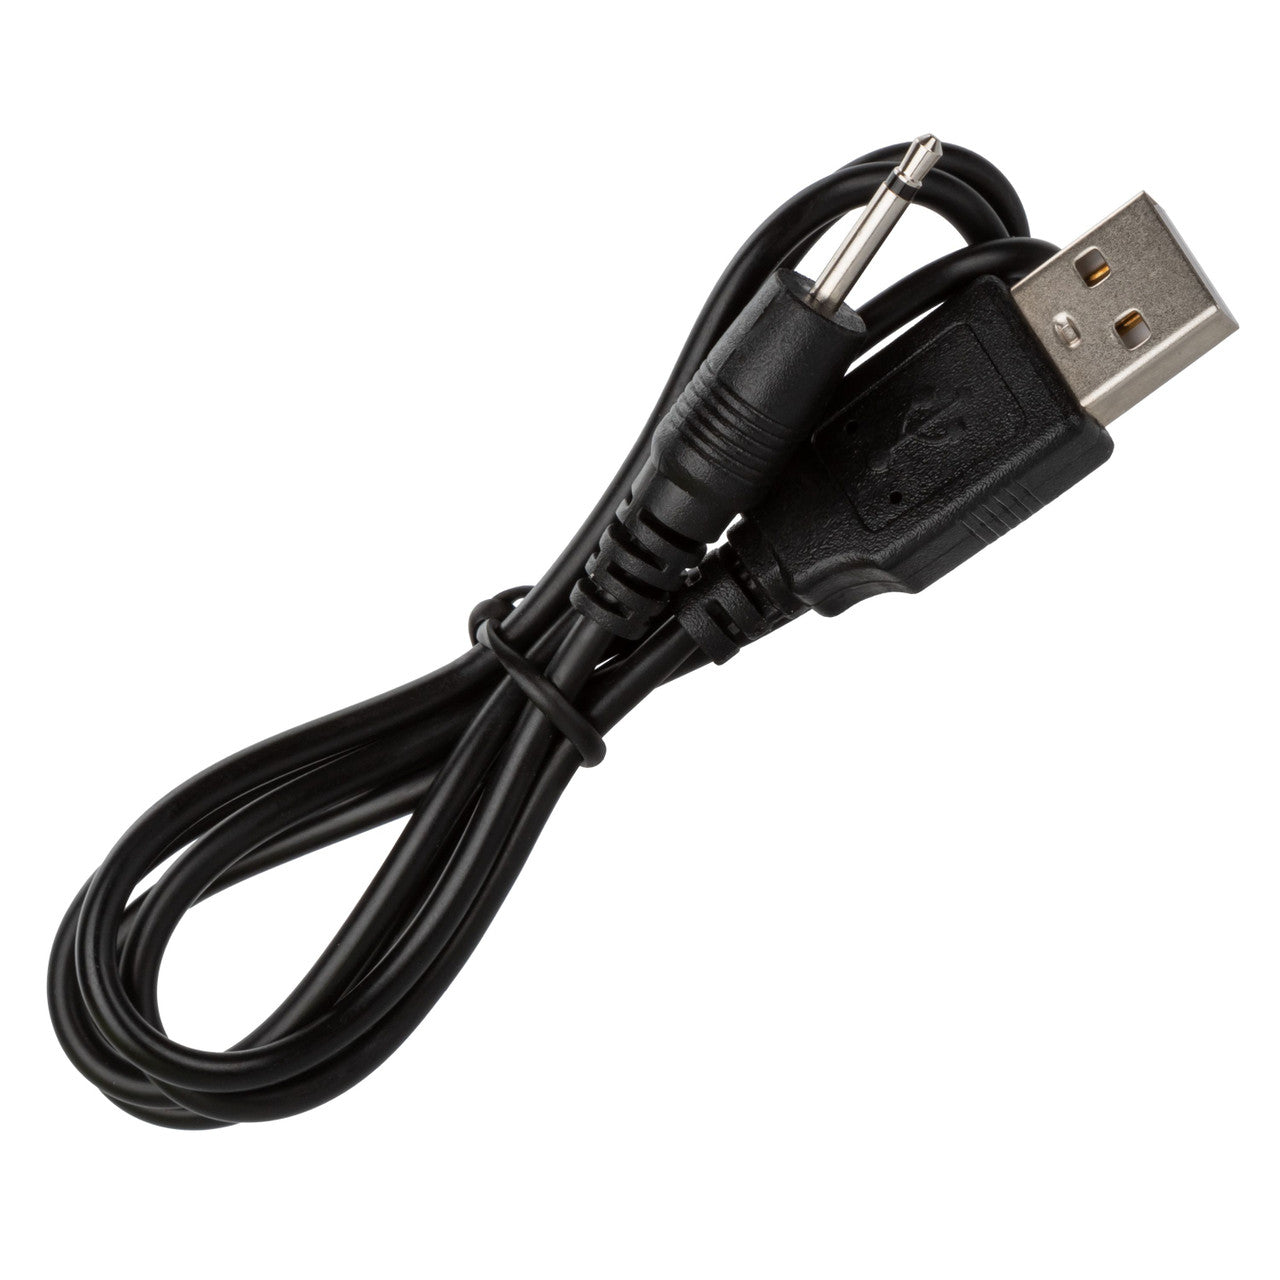 Replacement USB-prong charger